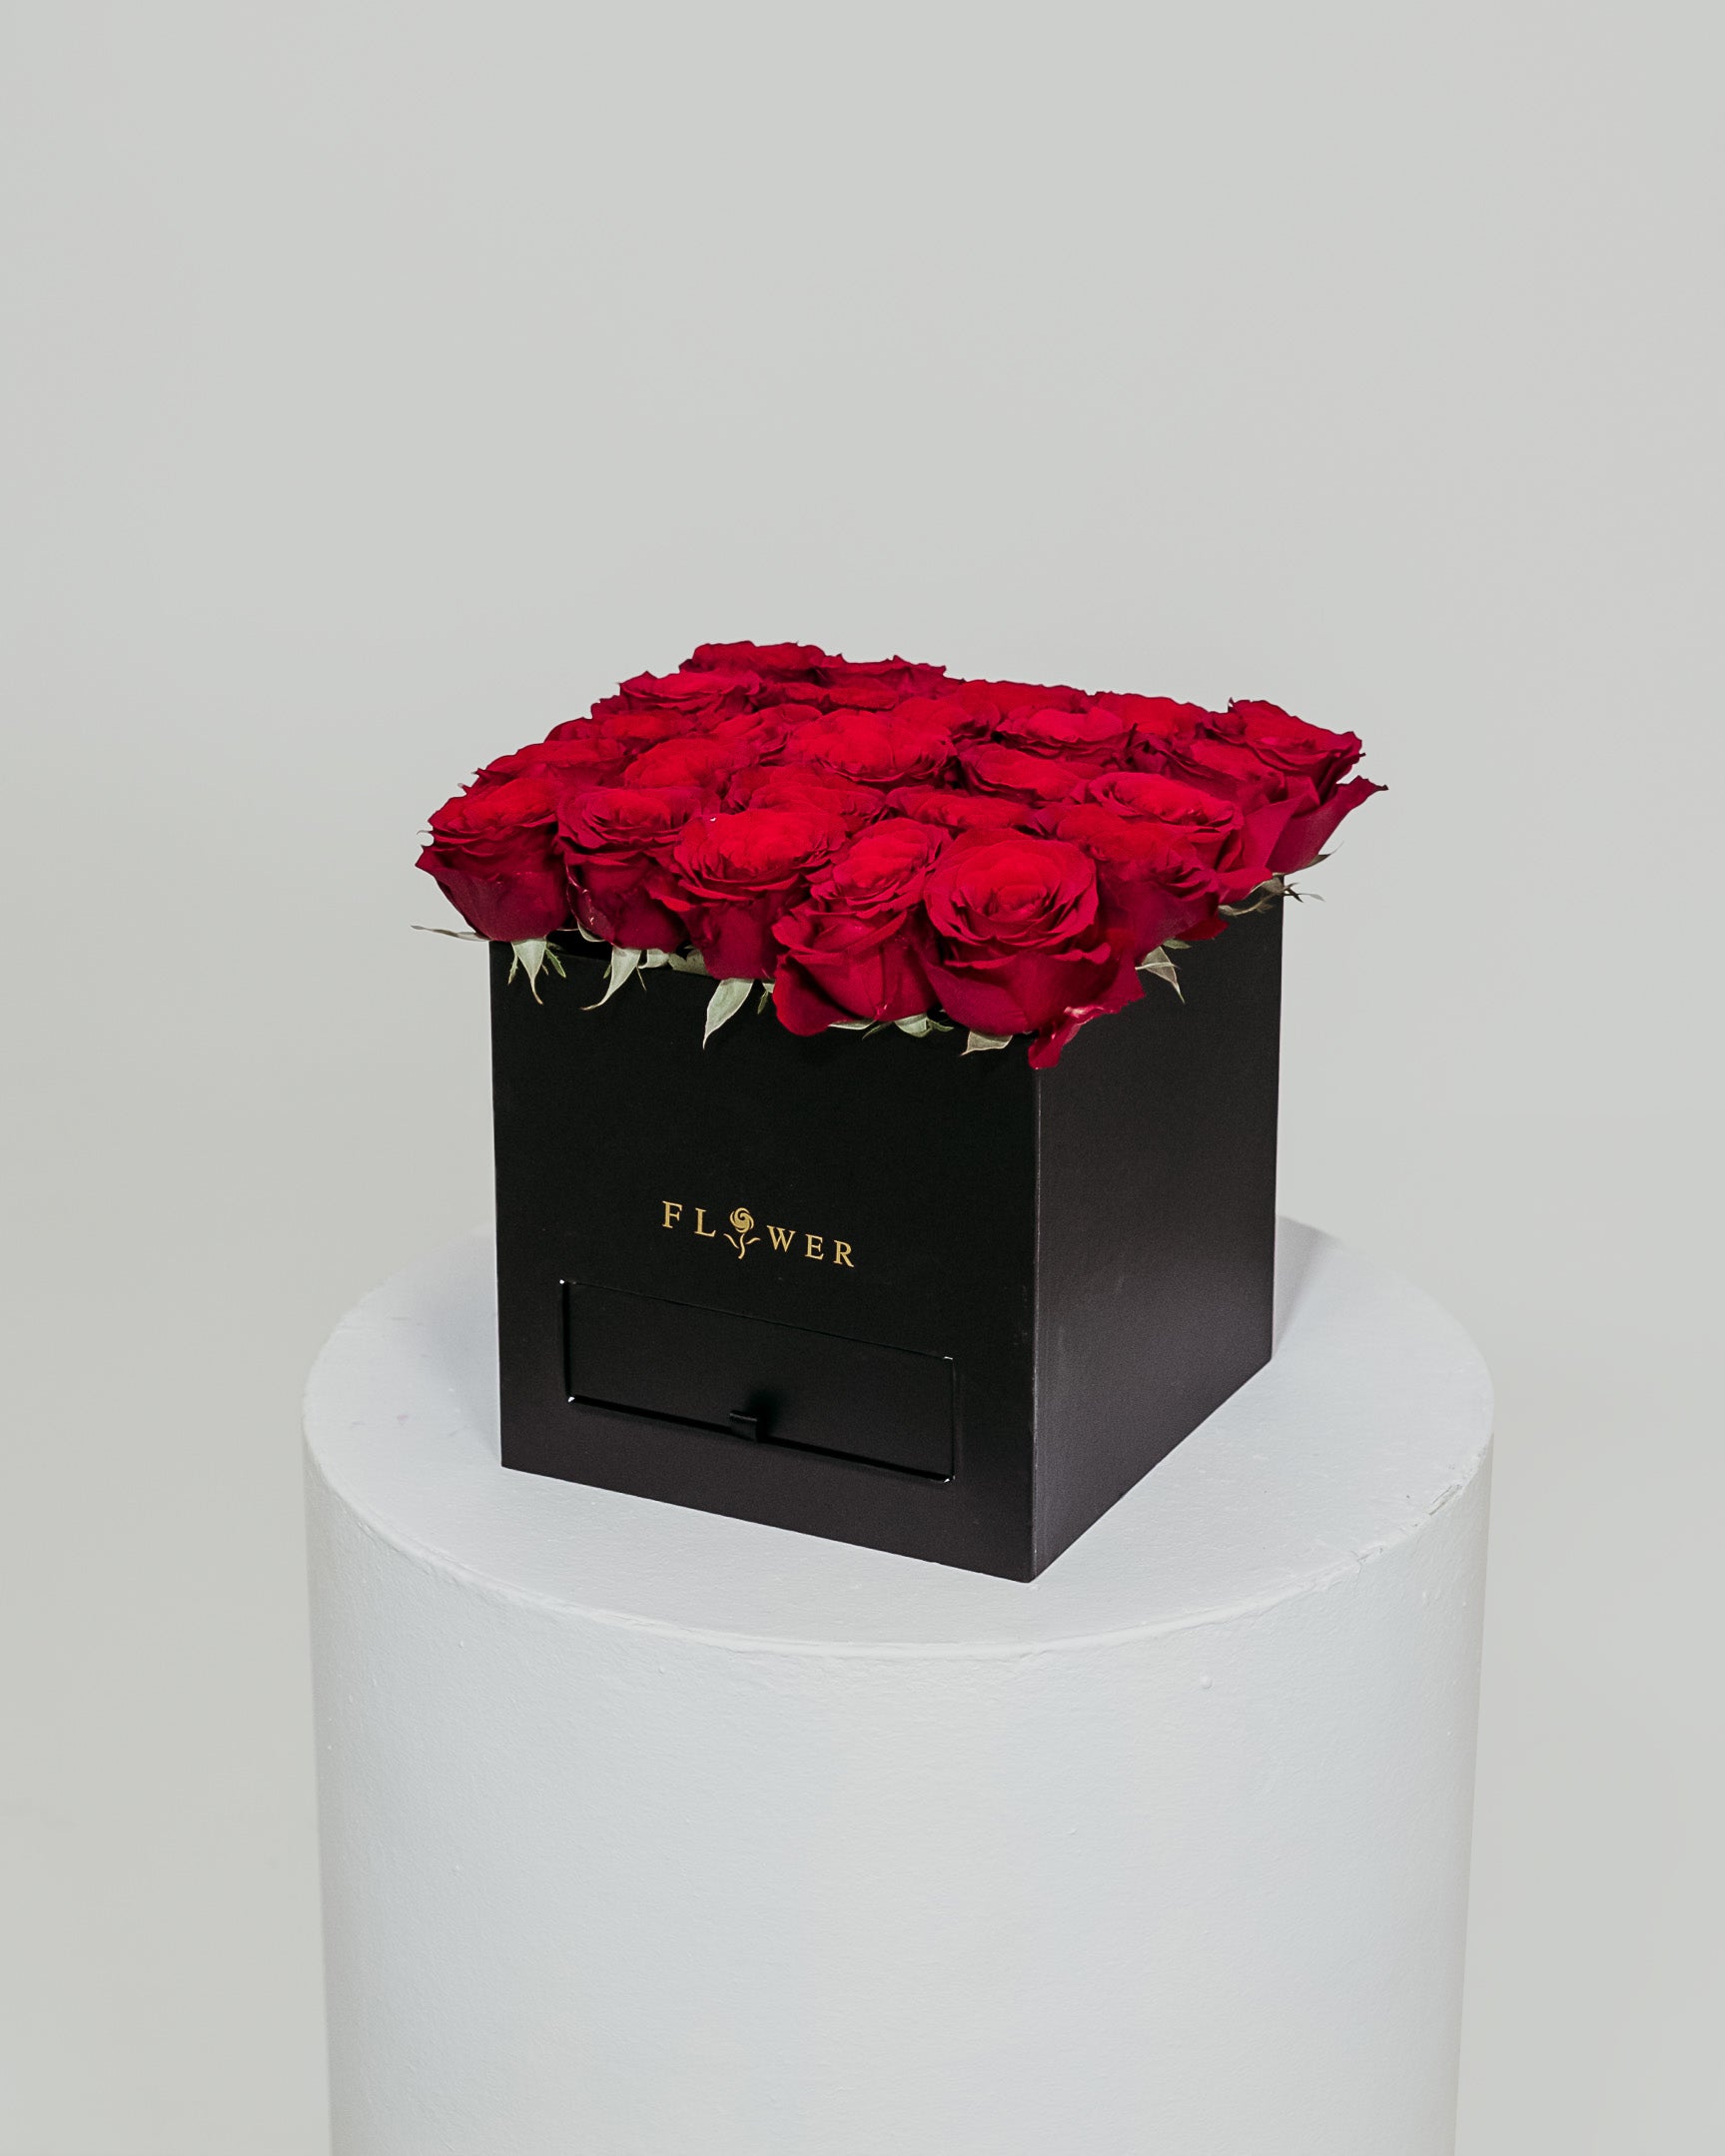 A sophisticated black box filled with vibrant red roses, accompanied by a drawer containing Ferrero Rocher chocolates